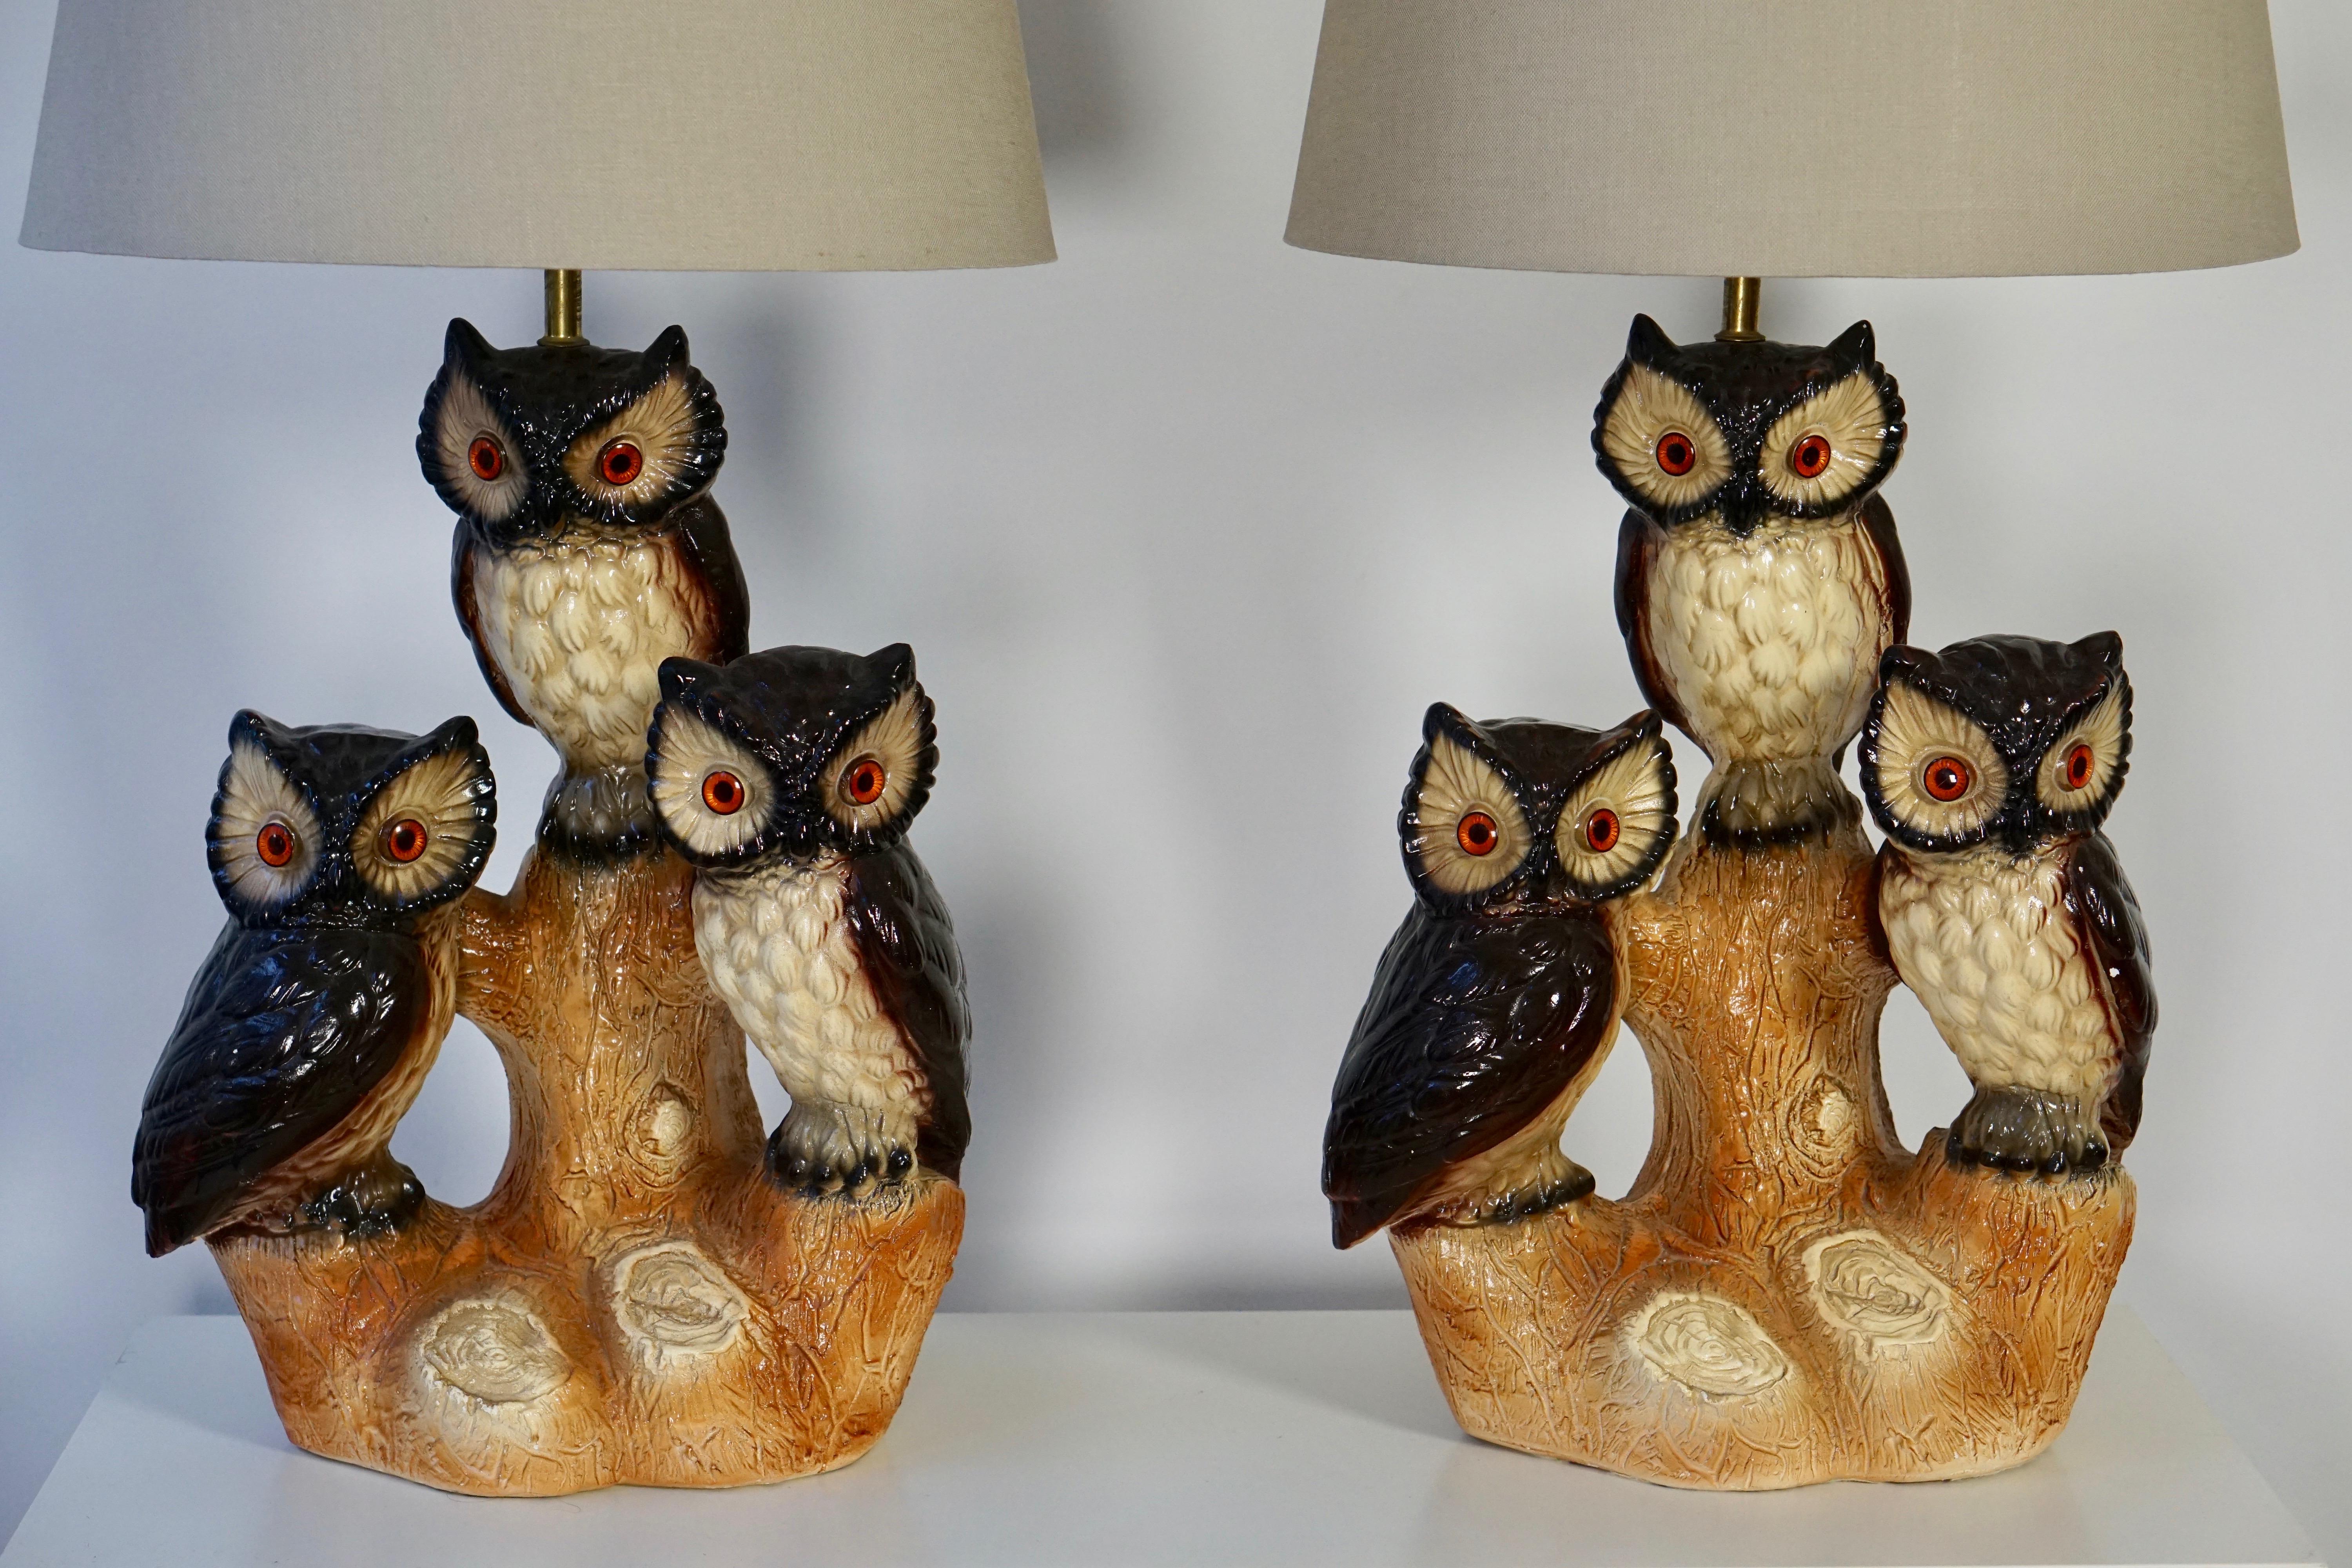 20th Century Mid-Century Modern Sculptural Ceramic Owl Lamps, 1970s For Sale